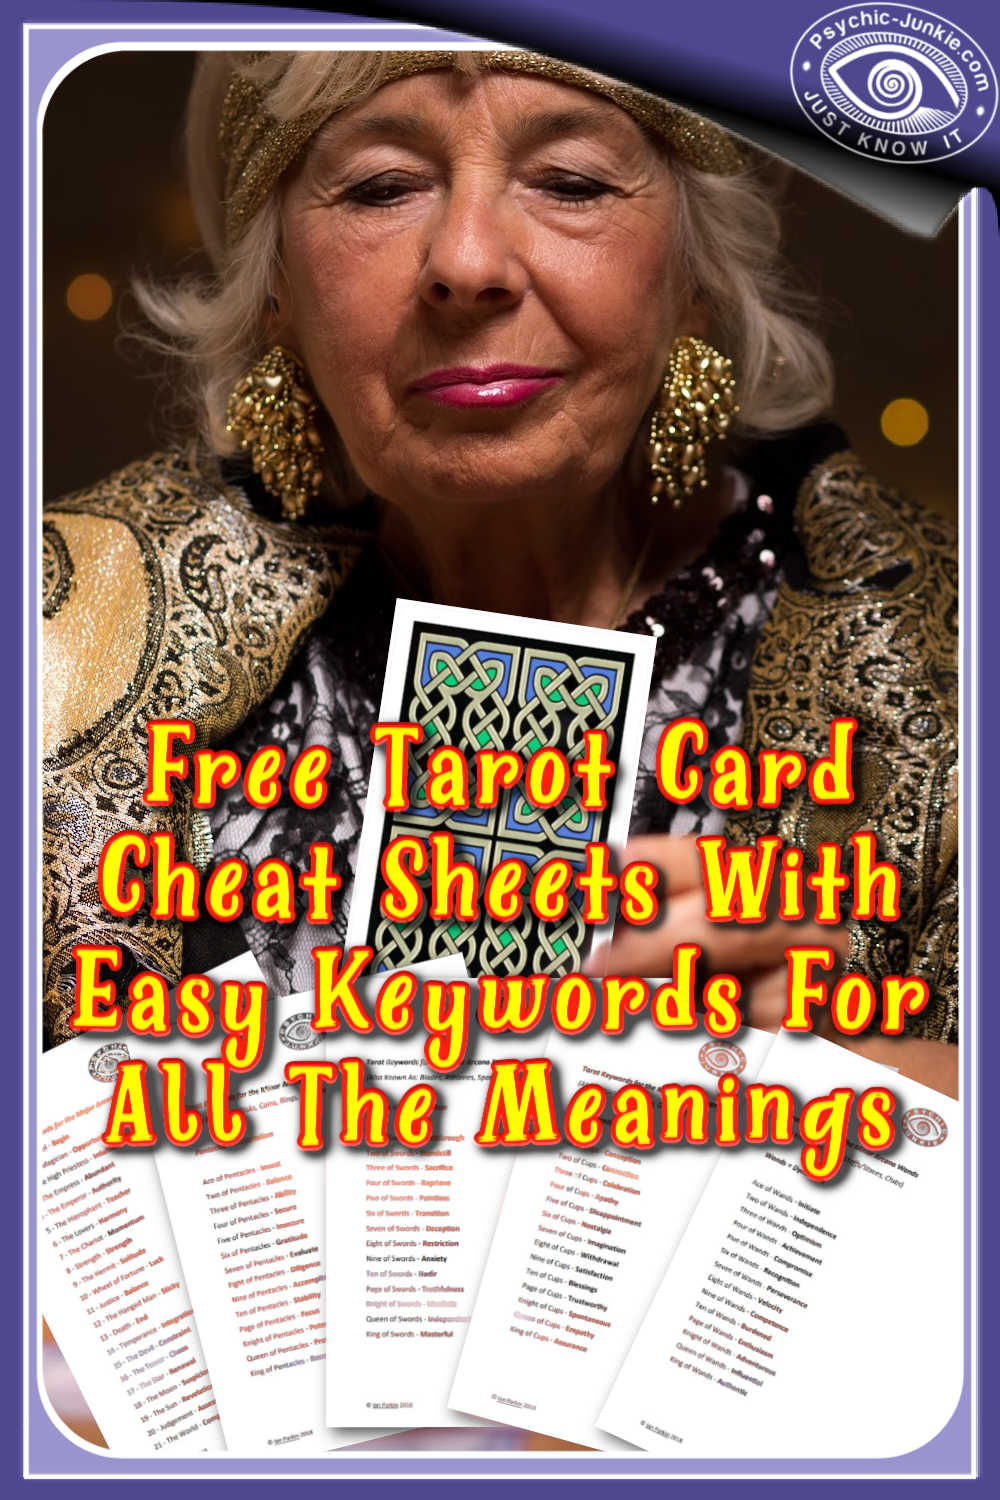 Free tarot card cheat sheets are downloadable inside our Psychic Circle.